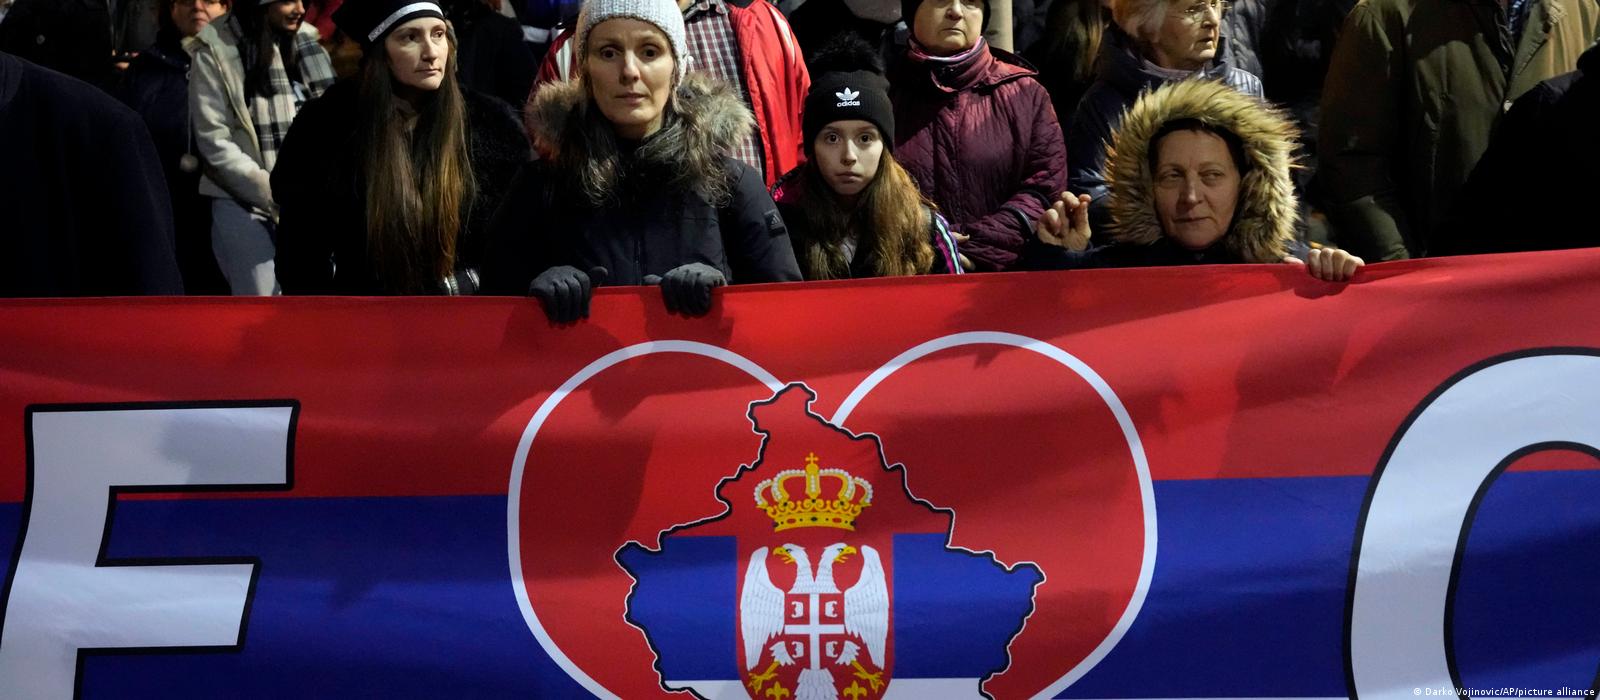 Kosovo is Serbia, the scandals continue even in the Champions League, the  fans of Crvena Zvezda were racist in the match against Young Boys - Sport